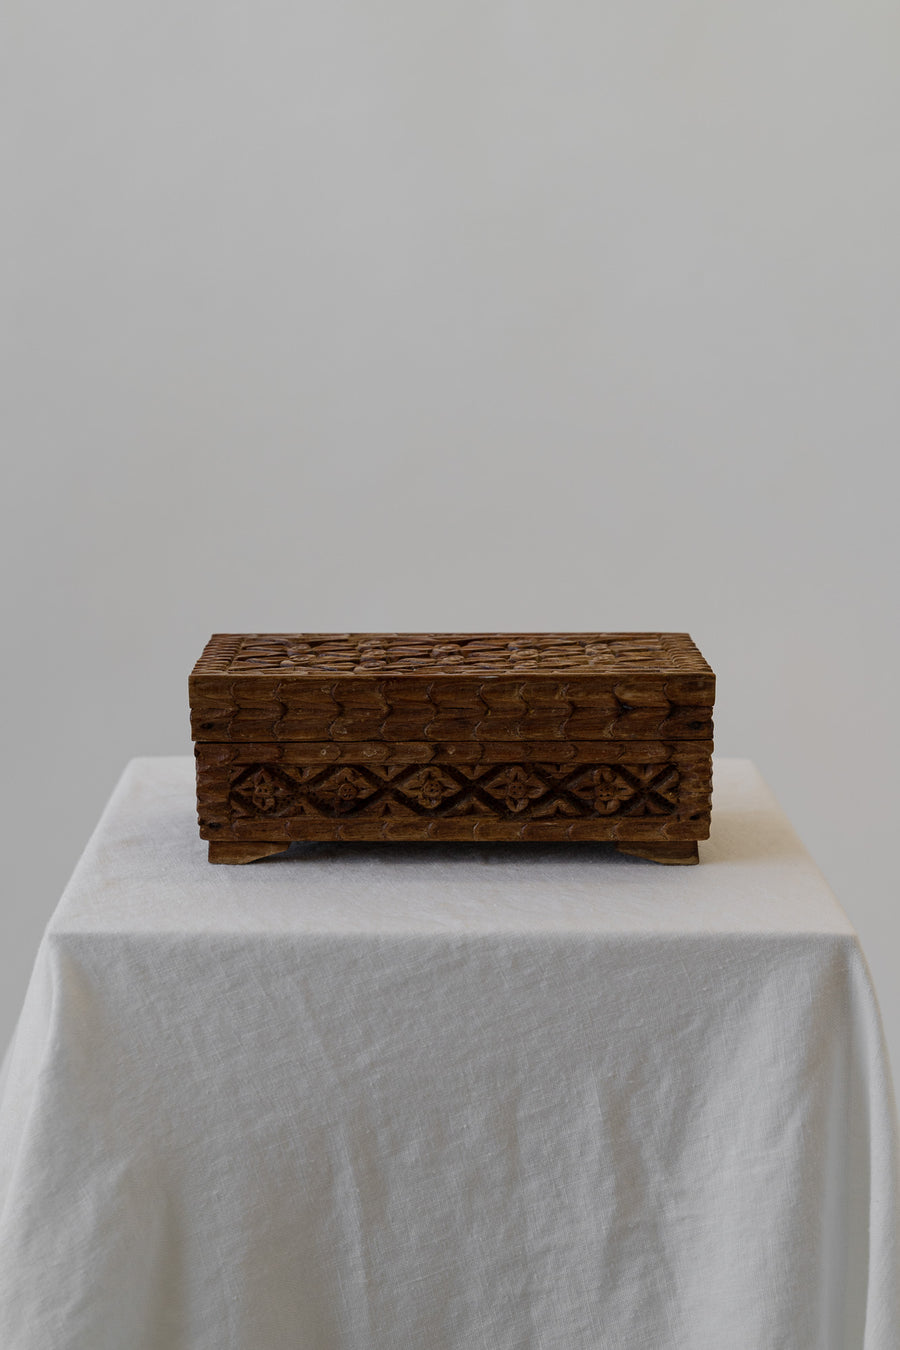 Hand Carved Wooden Box